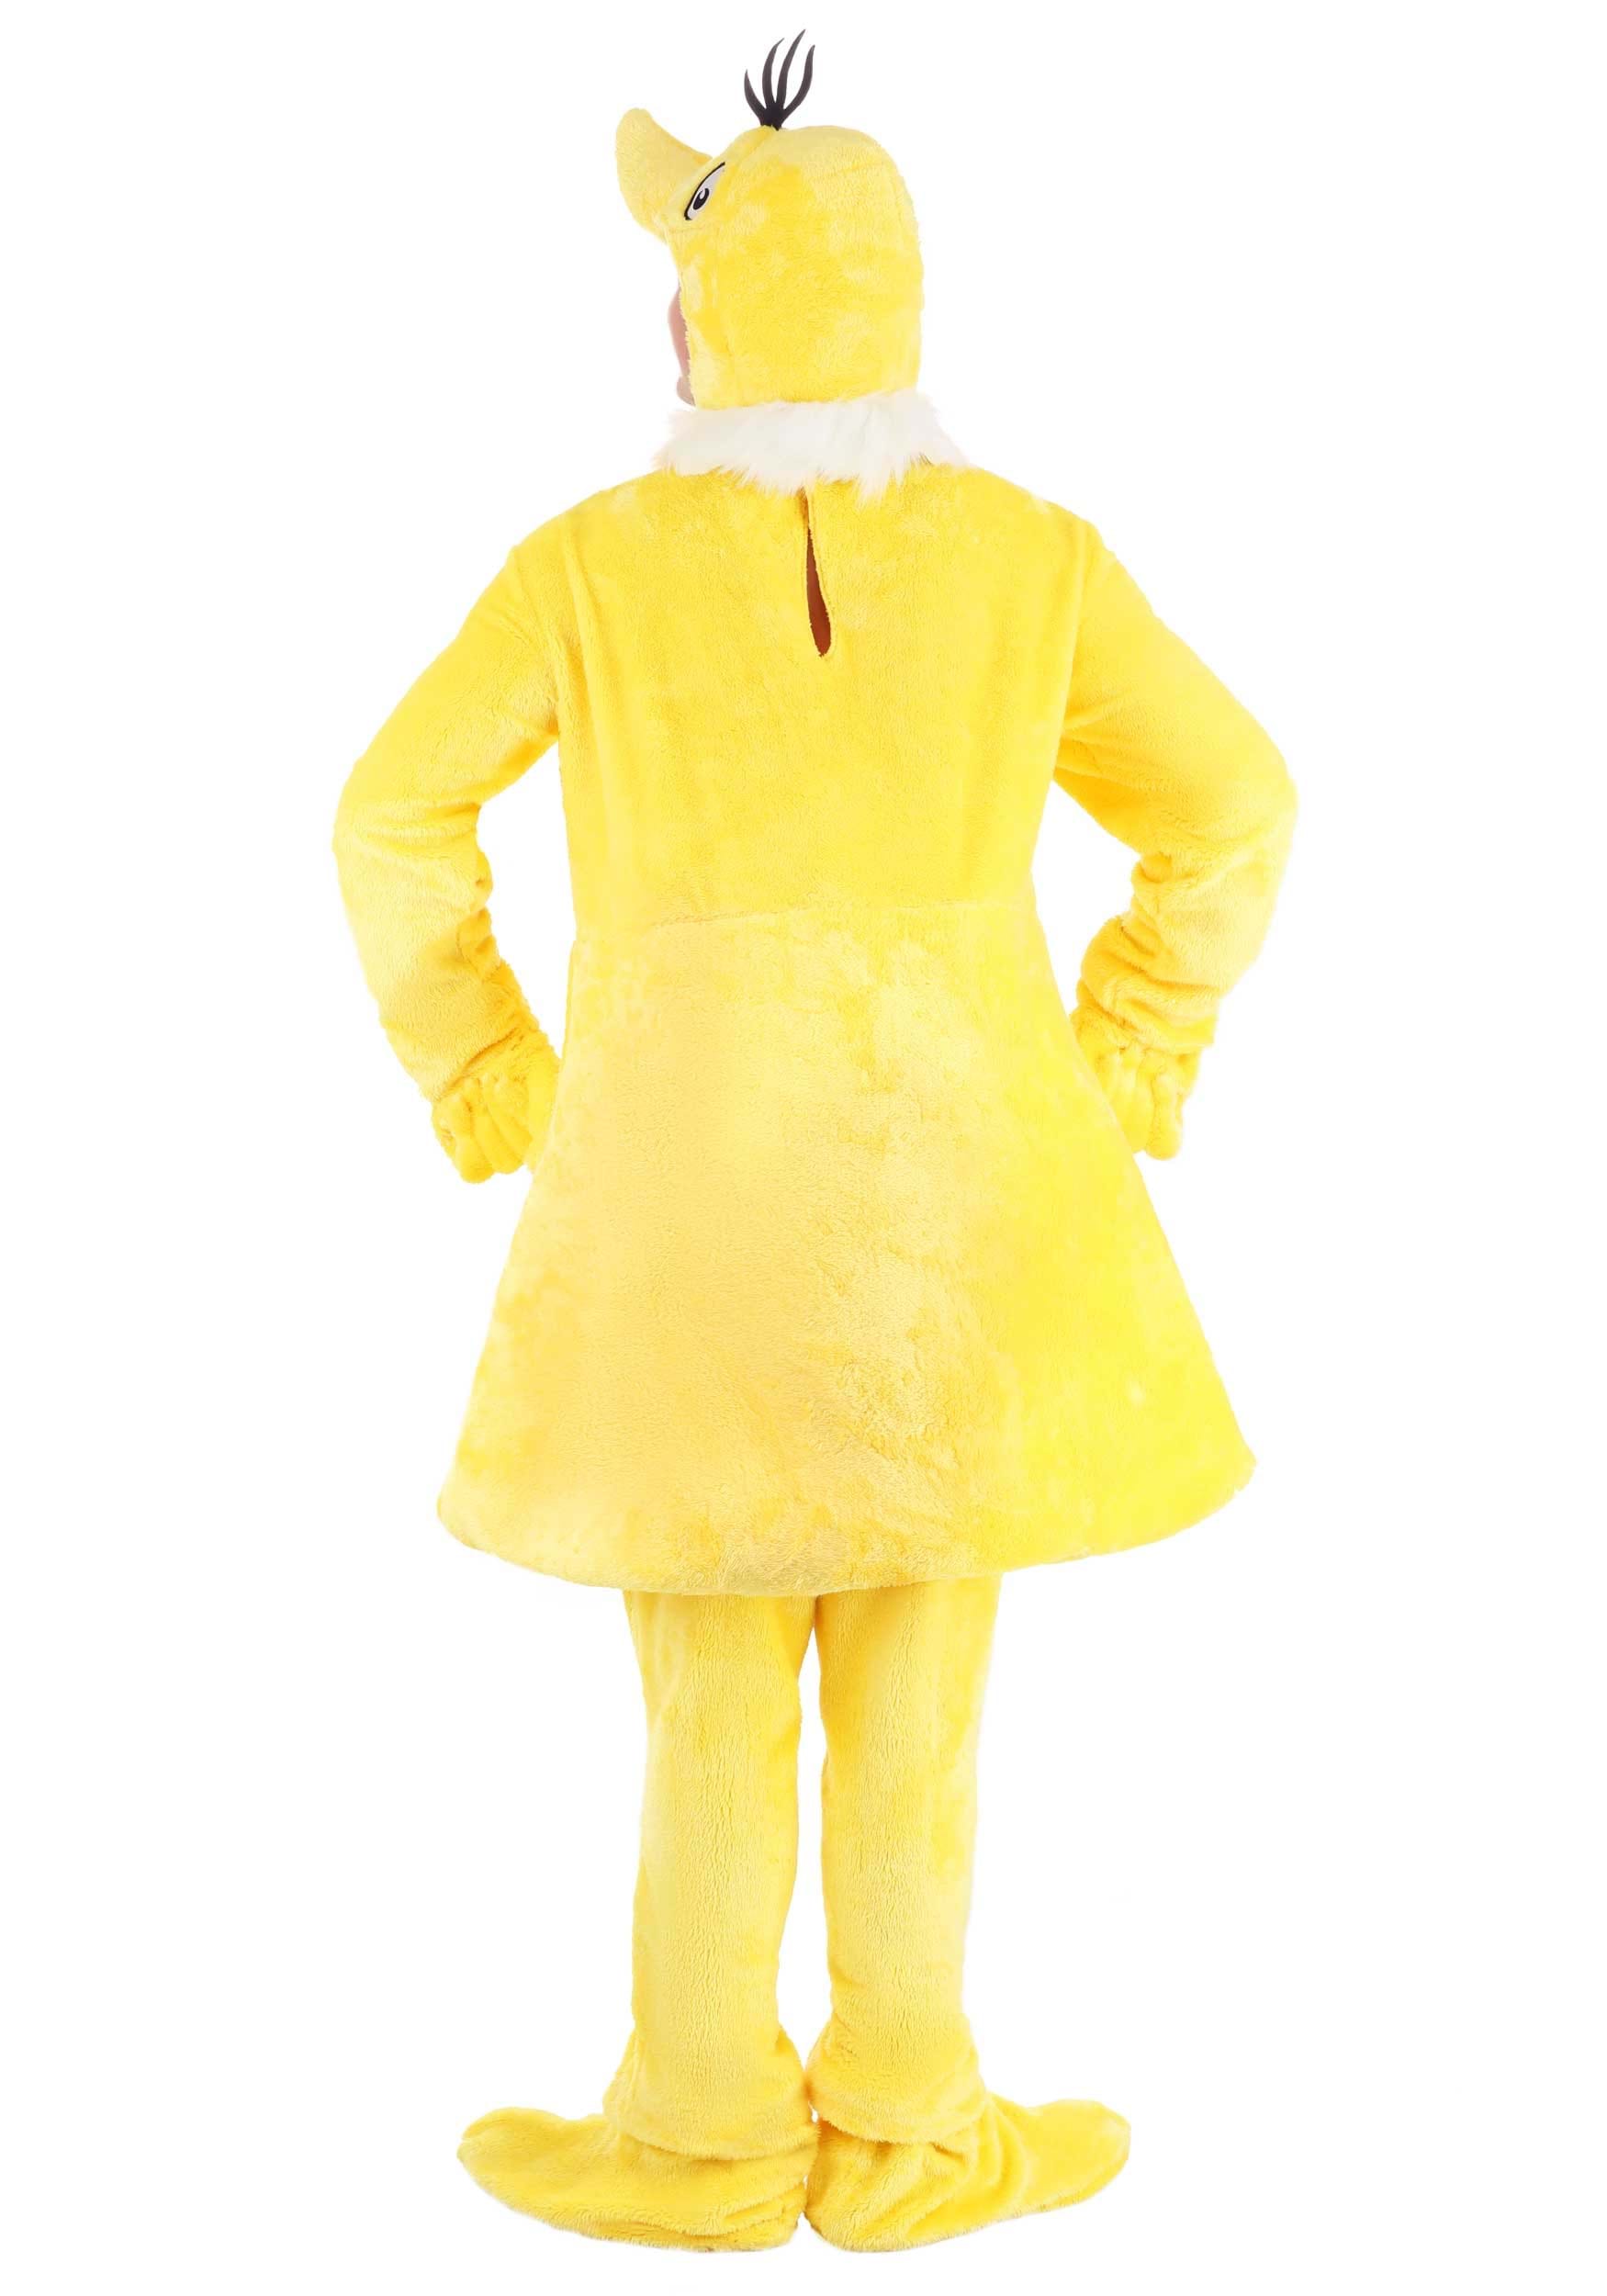 Dr. Seuss Star Bellied Sneetch Costume For Adults